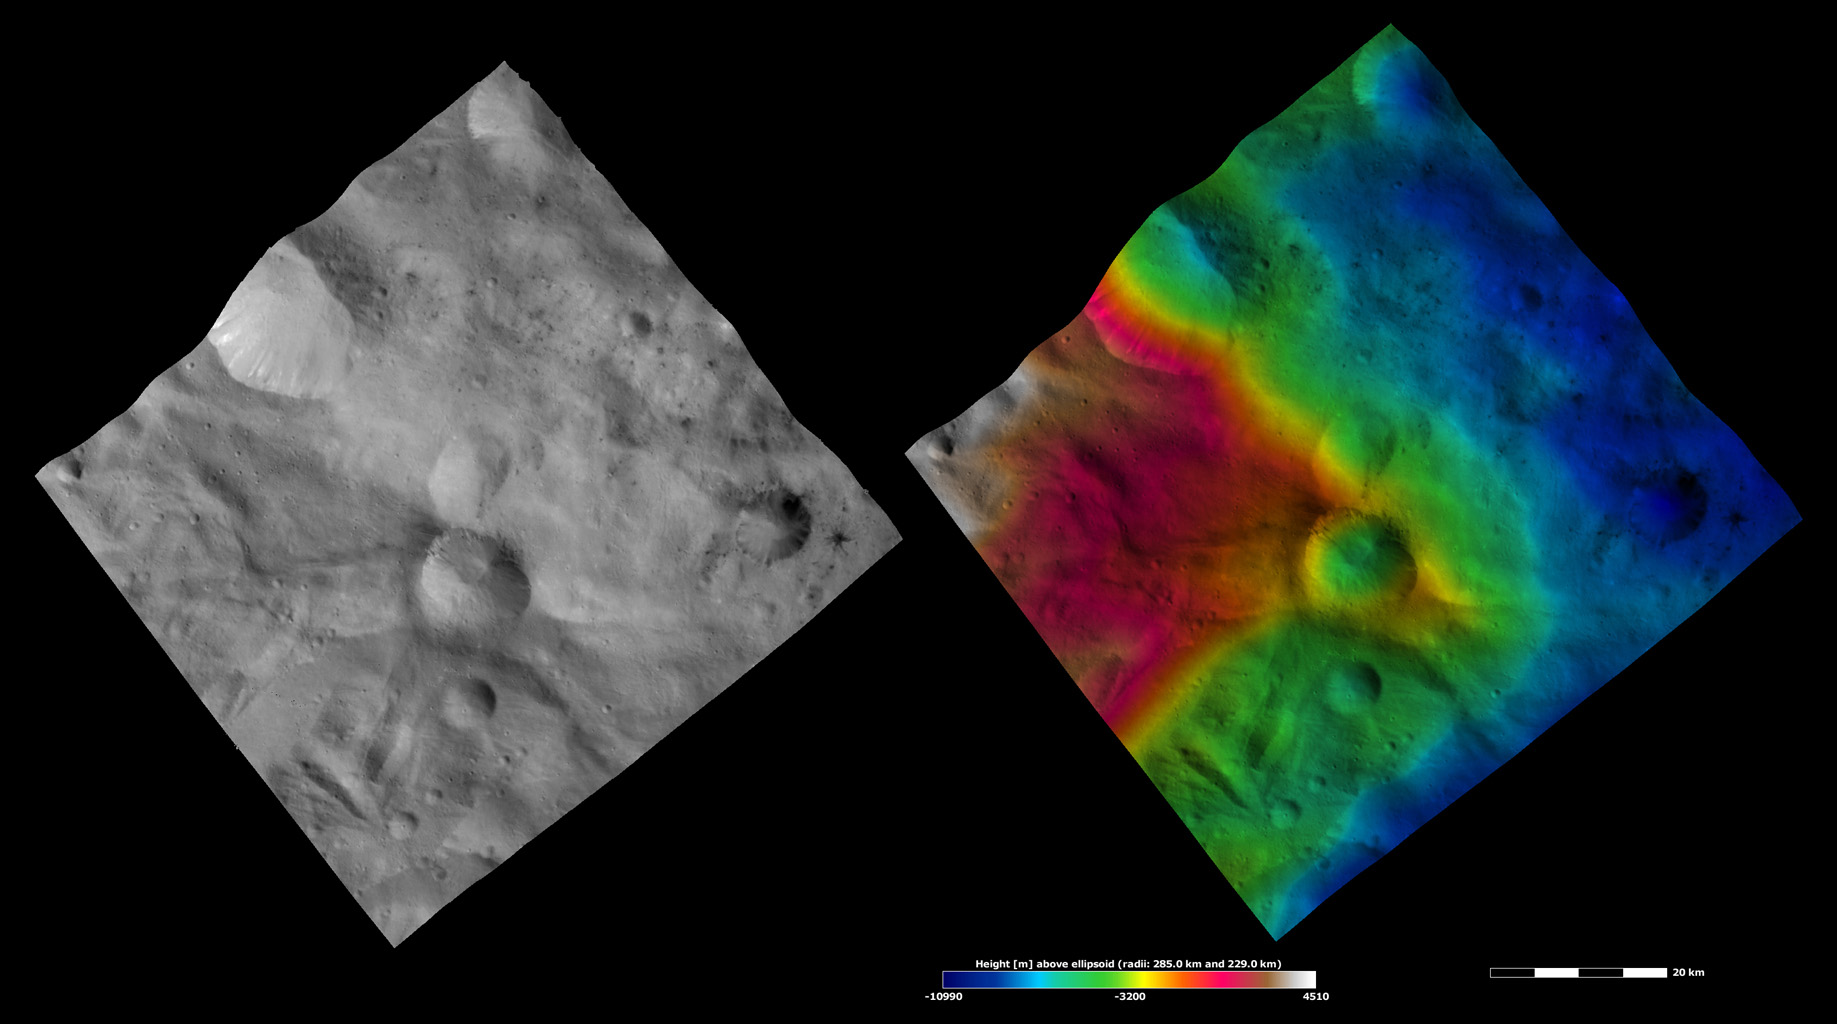 Apparent Brightness and Topography Images of Helena and Laelia Craters